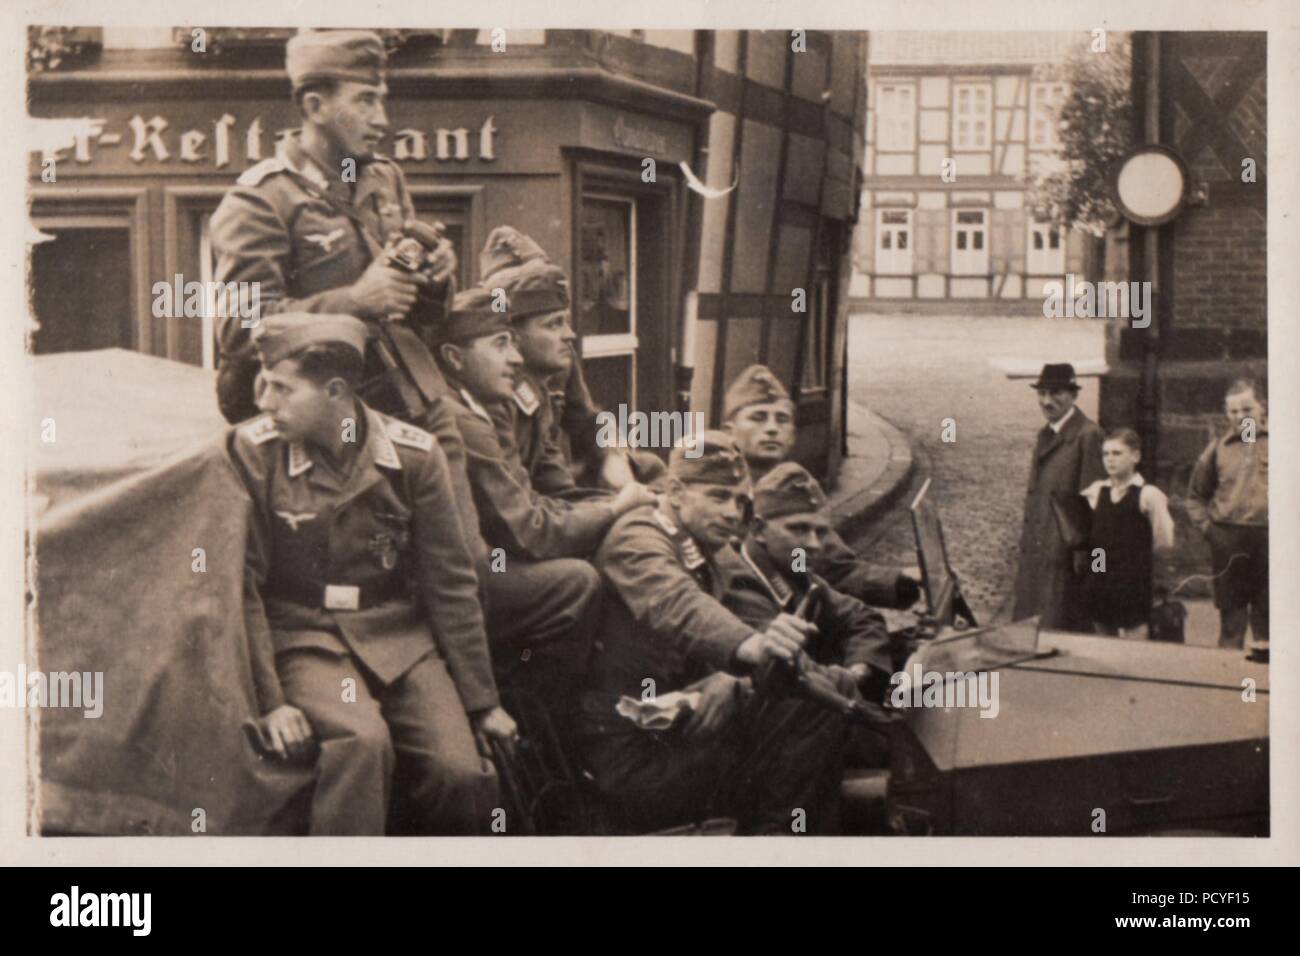 Image from the photo album of Oberfeldwebel Gotthilf Benseler of 9. Staffel, Kampfgeschwader 3: Oberfeldwebel Gotthilf Benseler (in middle of back row, looking to his front) and fellow Luftwaffe airmen drive through a German town in an open truck in 1941. Stock Photo